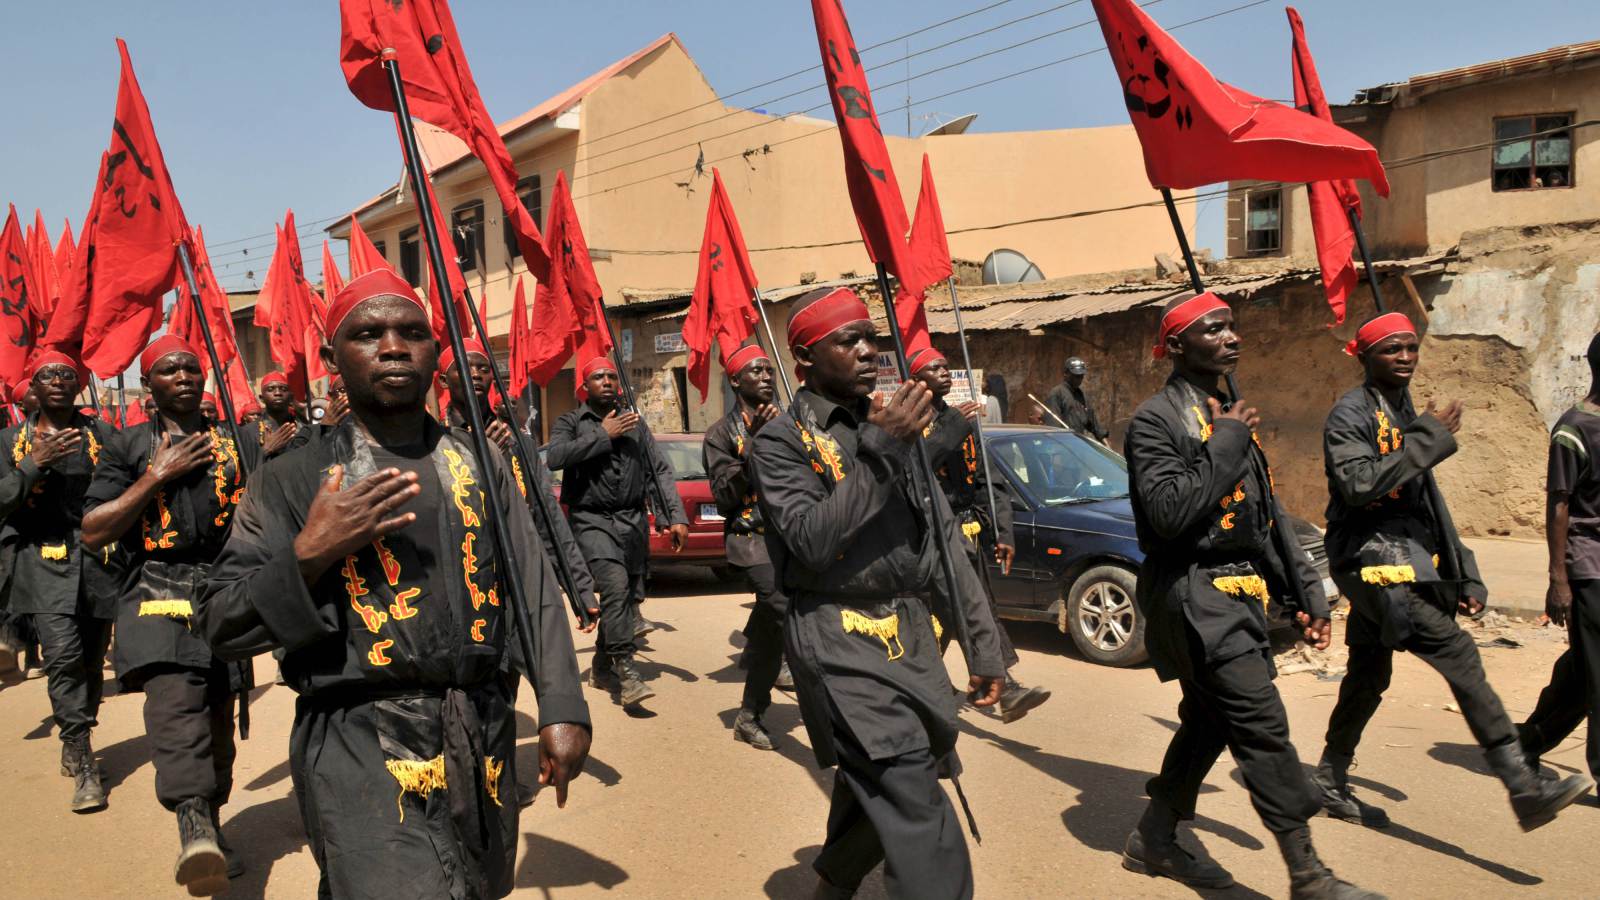 13 Shiite members killed in clash with Nigerian forces: Group